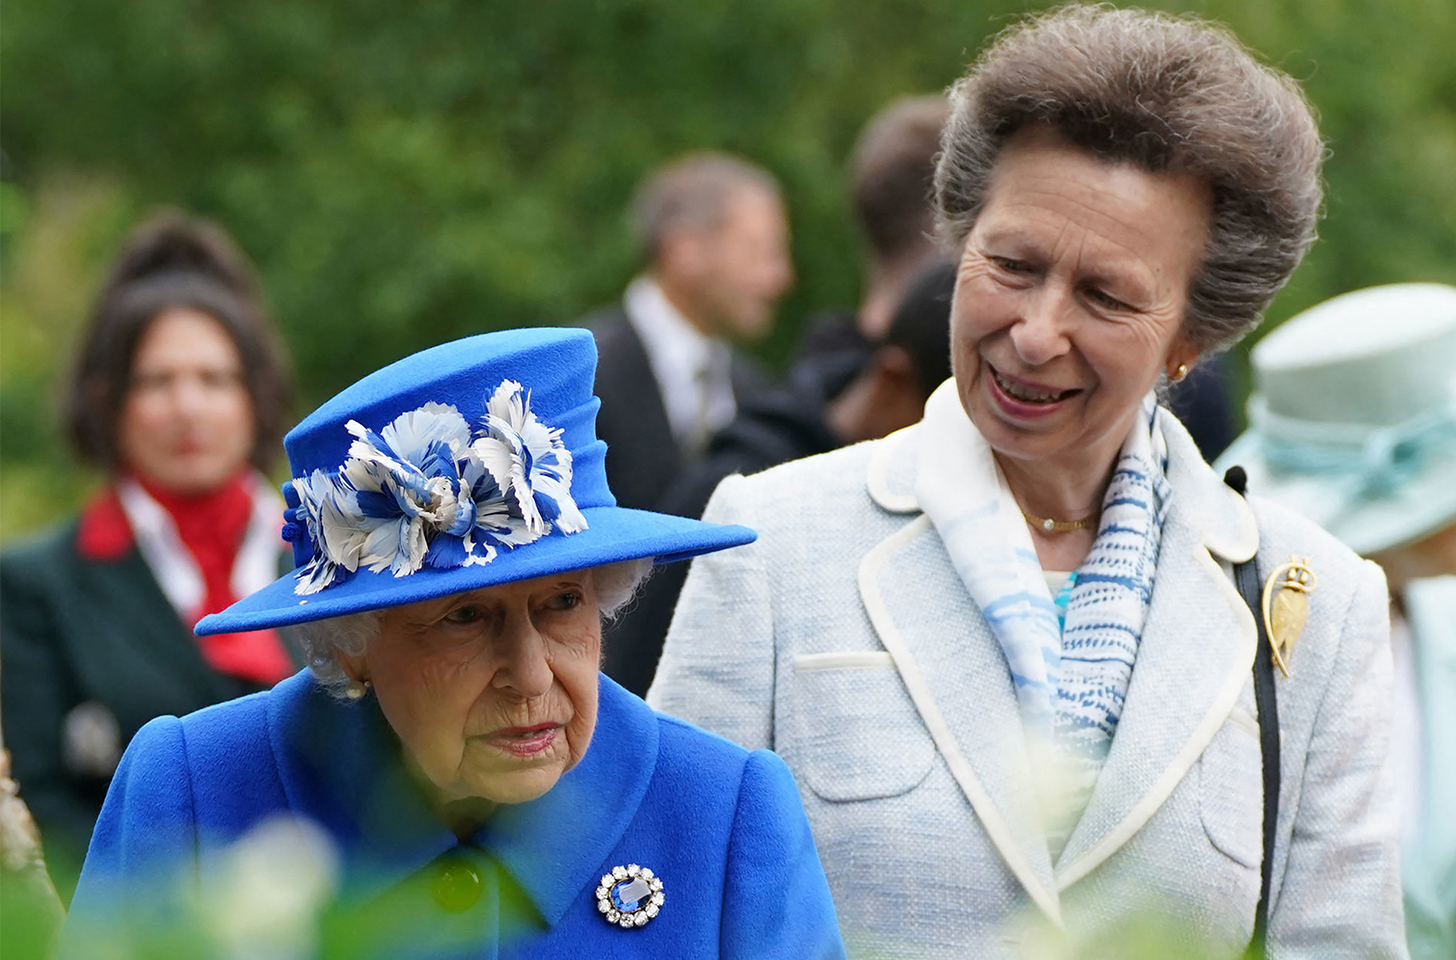 Princess Anne on the right, looking and walking with Queen Elizabeth